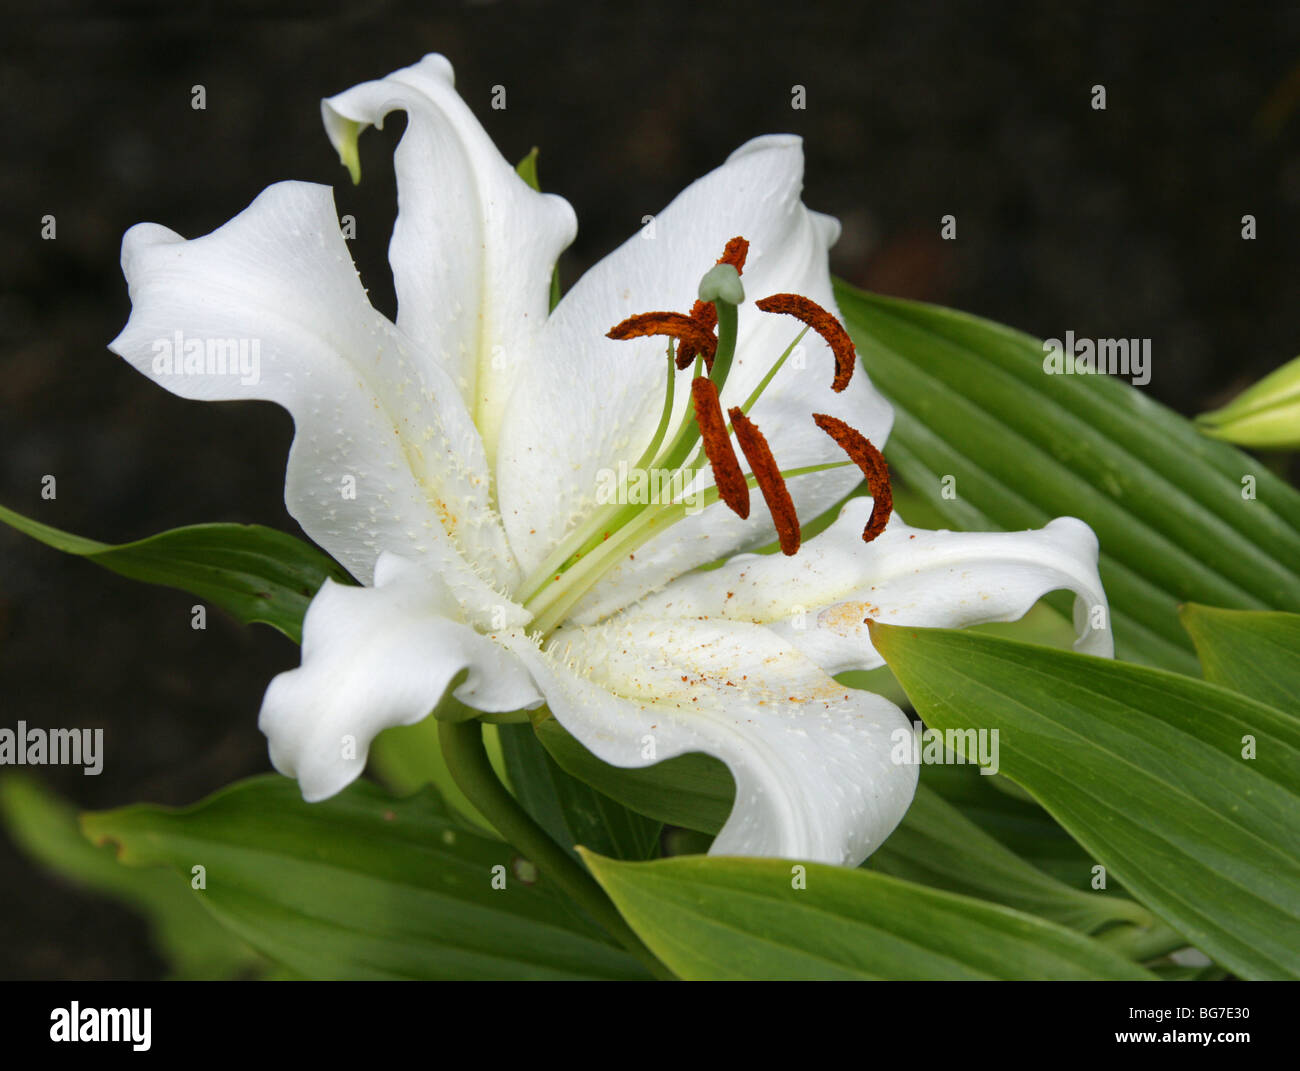 Golden Rayed Lily of Japan, Goldband Lily, Lilium or Species Lily, Lilium auratum, Liliaceae, Japan, Asia Stock Photo